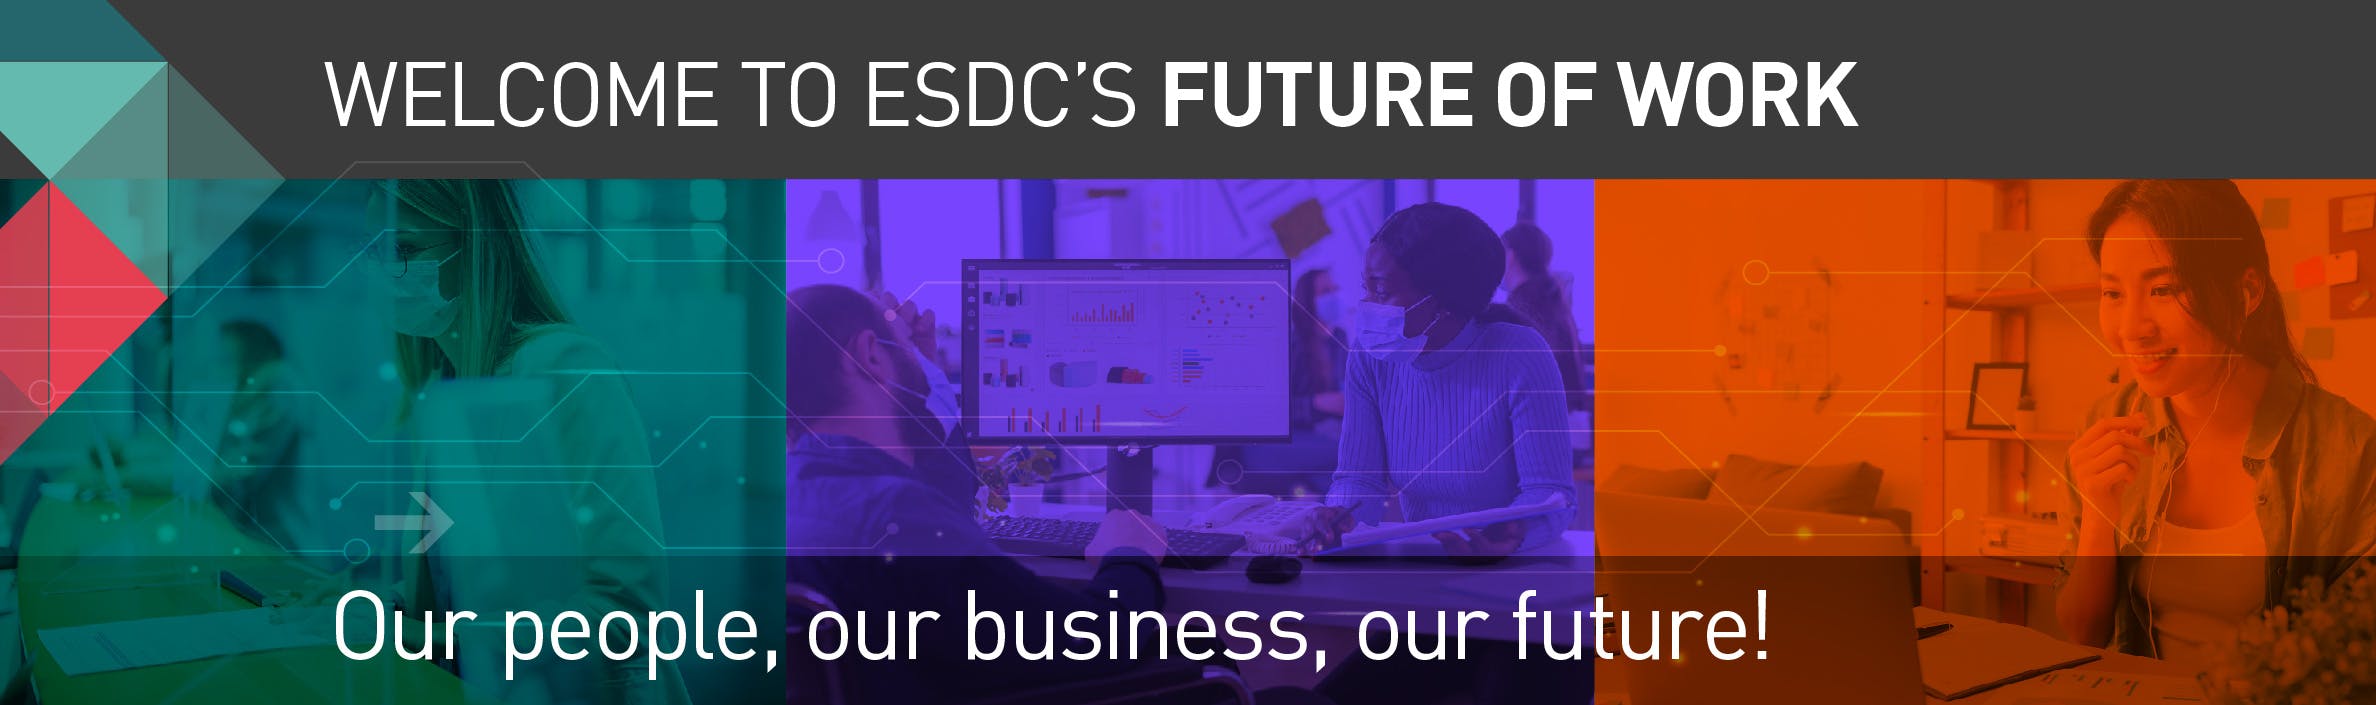 Welcome To ESDC's Future of Work. Our people, our business, our future!